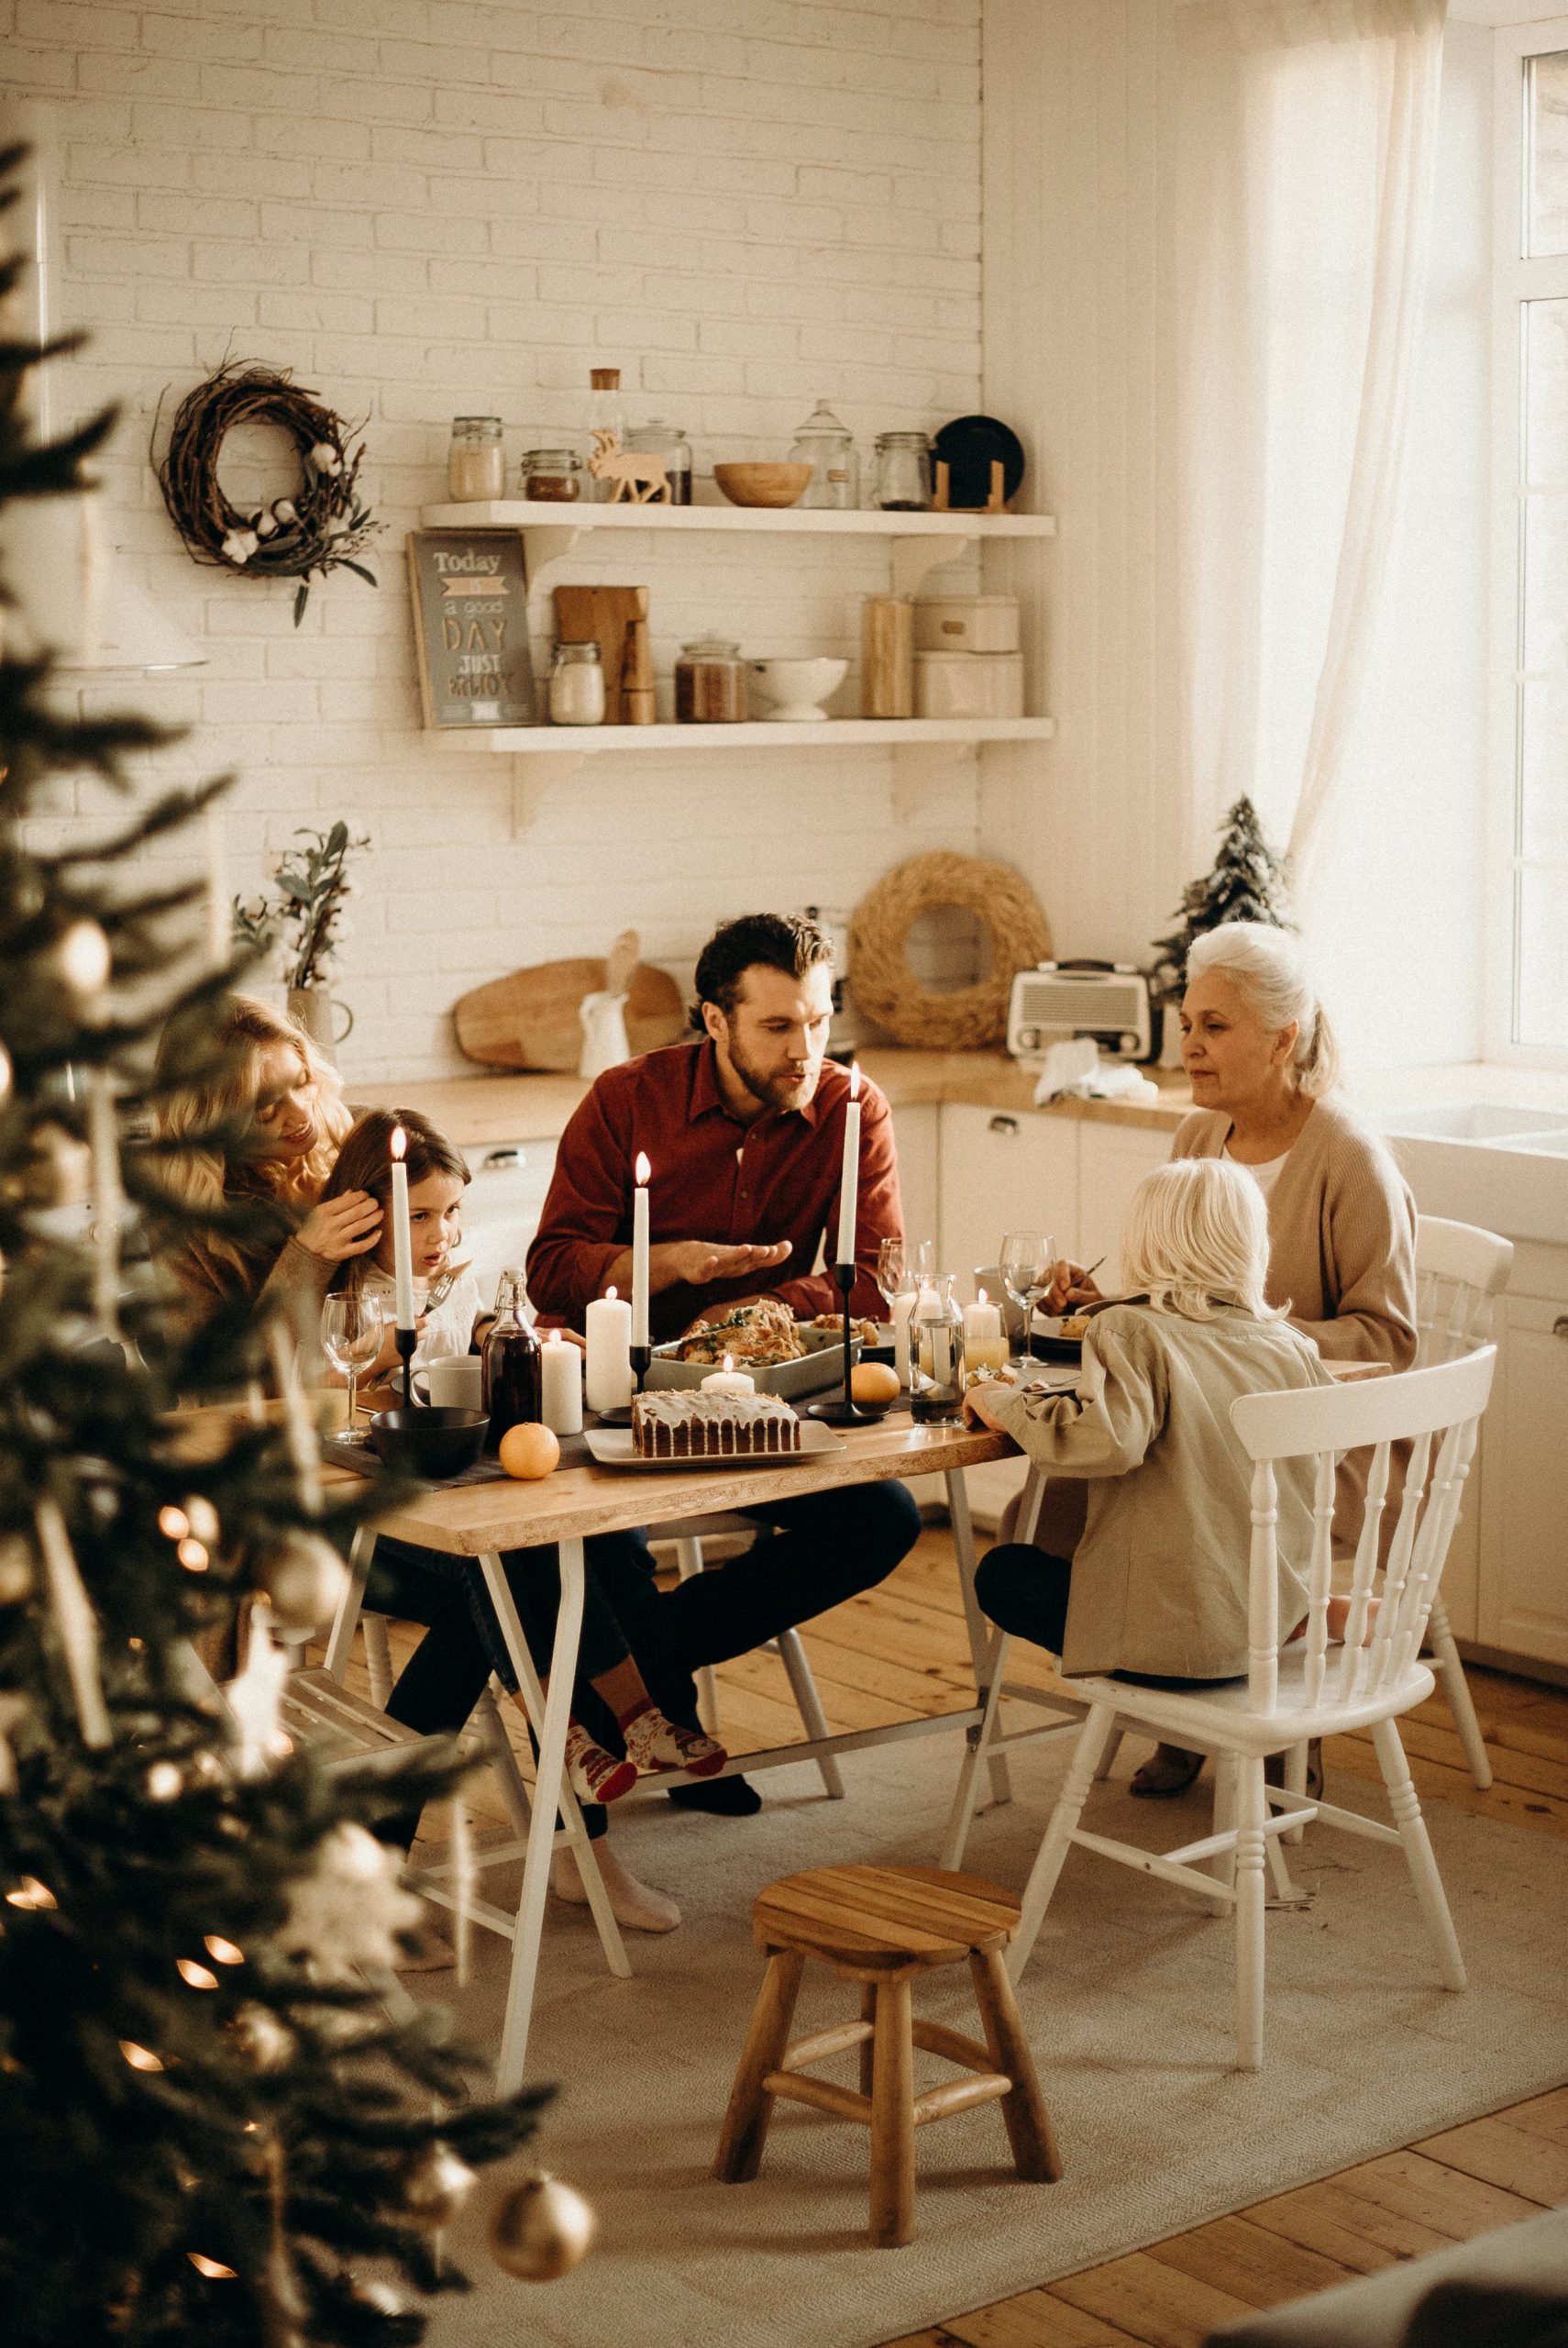 Family enjoying a festive meal together in a warmly lit kitchen with Christmas decor. 